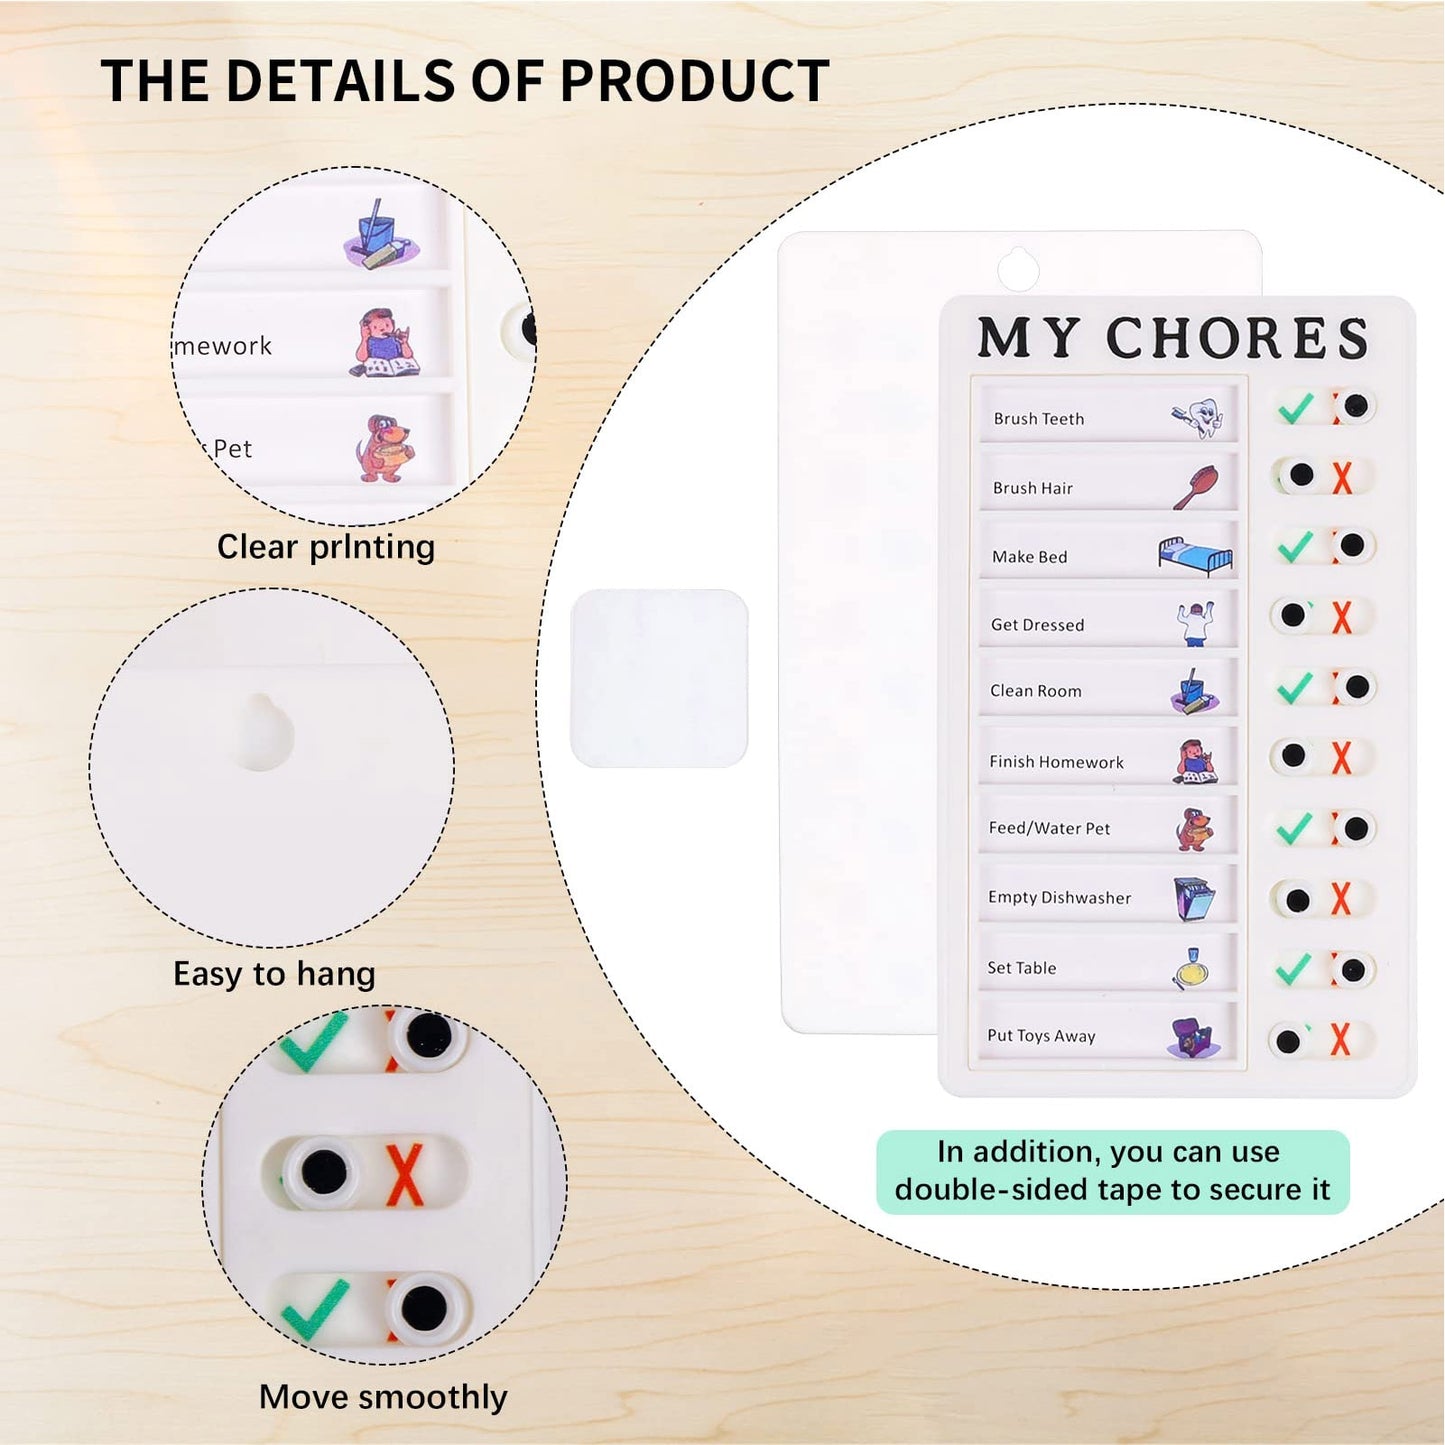 Chores Portable Memo Board Daily Schedule For Chart Memo